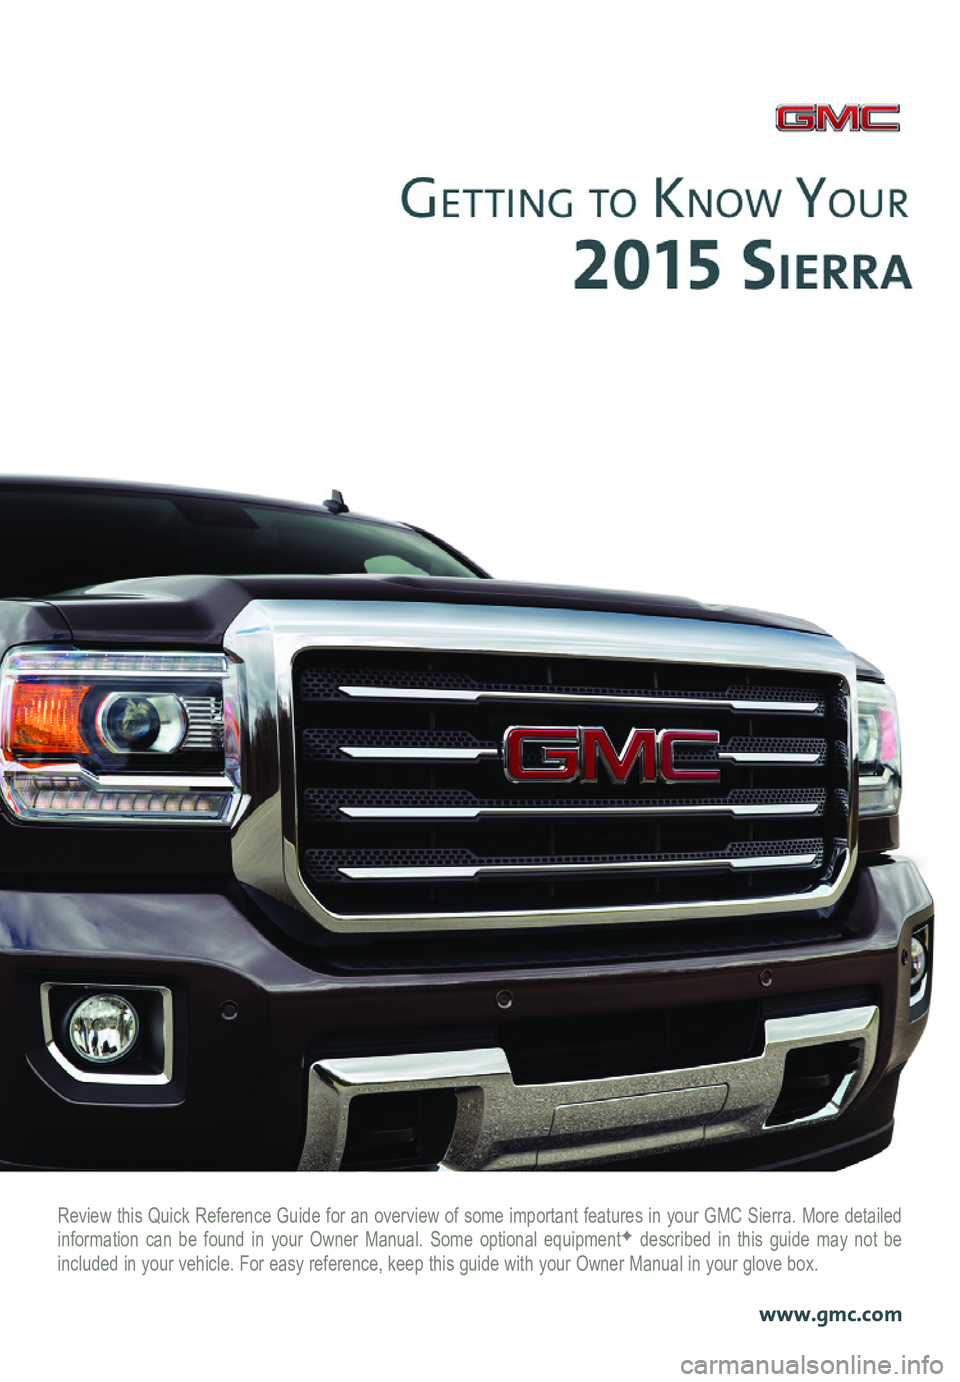 GMC SIERRA 2015  Get To Know Guide Review this Quick Reference Guide for an overview of some important features in your GMC Sierra. More detailed information can be found in your Owner Manual. Some optional equipmentF described in this